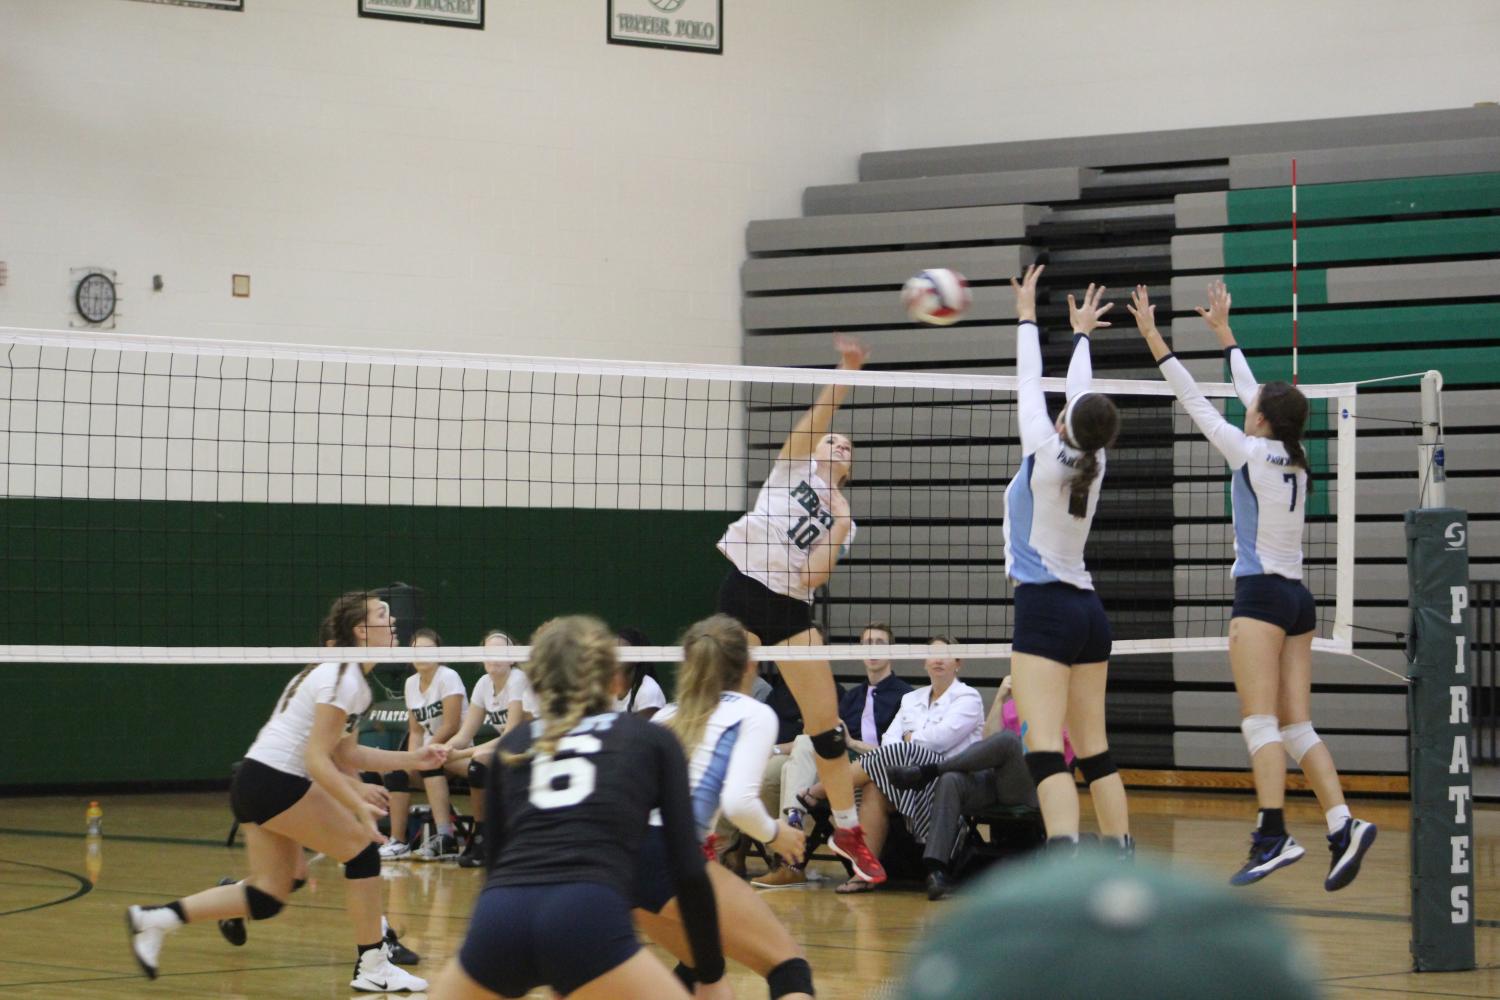 Pattonville+girls+volleyball+takes+on+tough+tournament